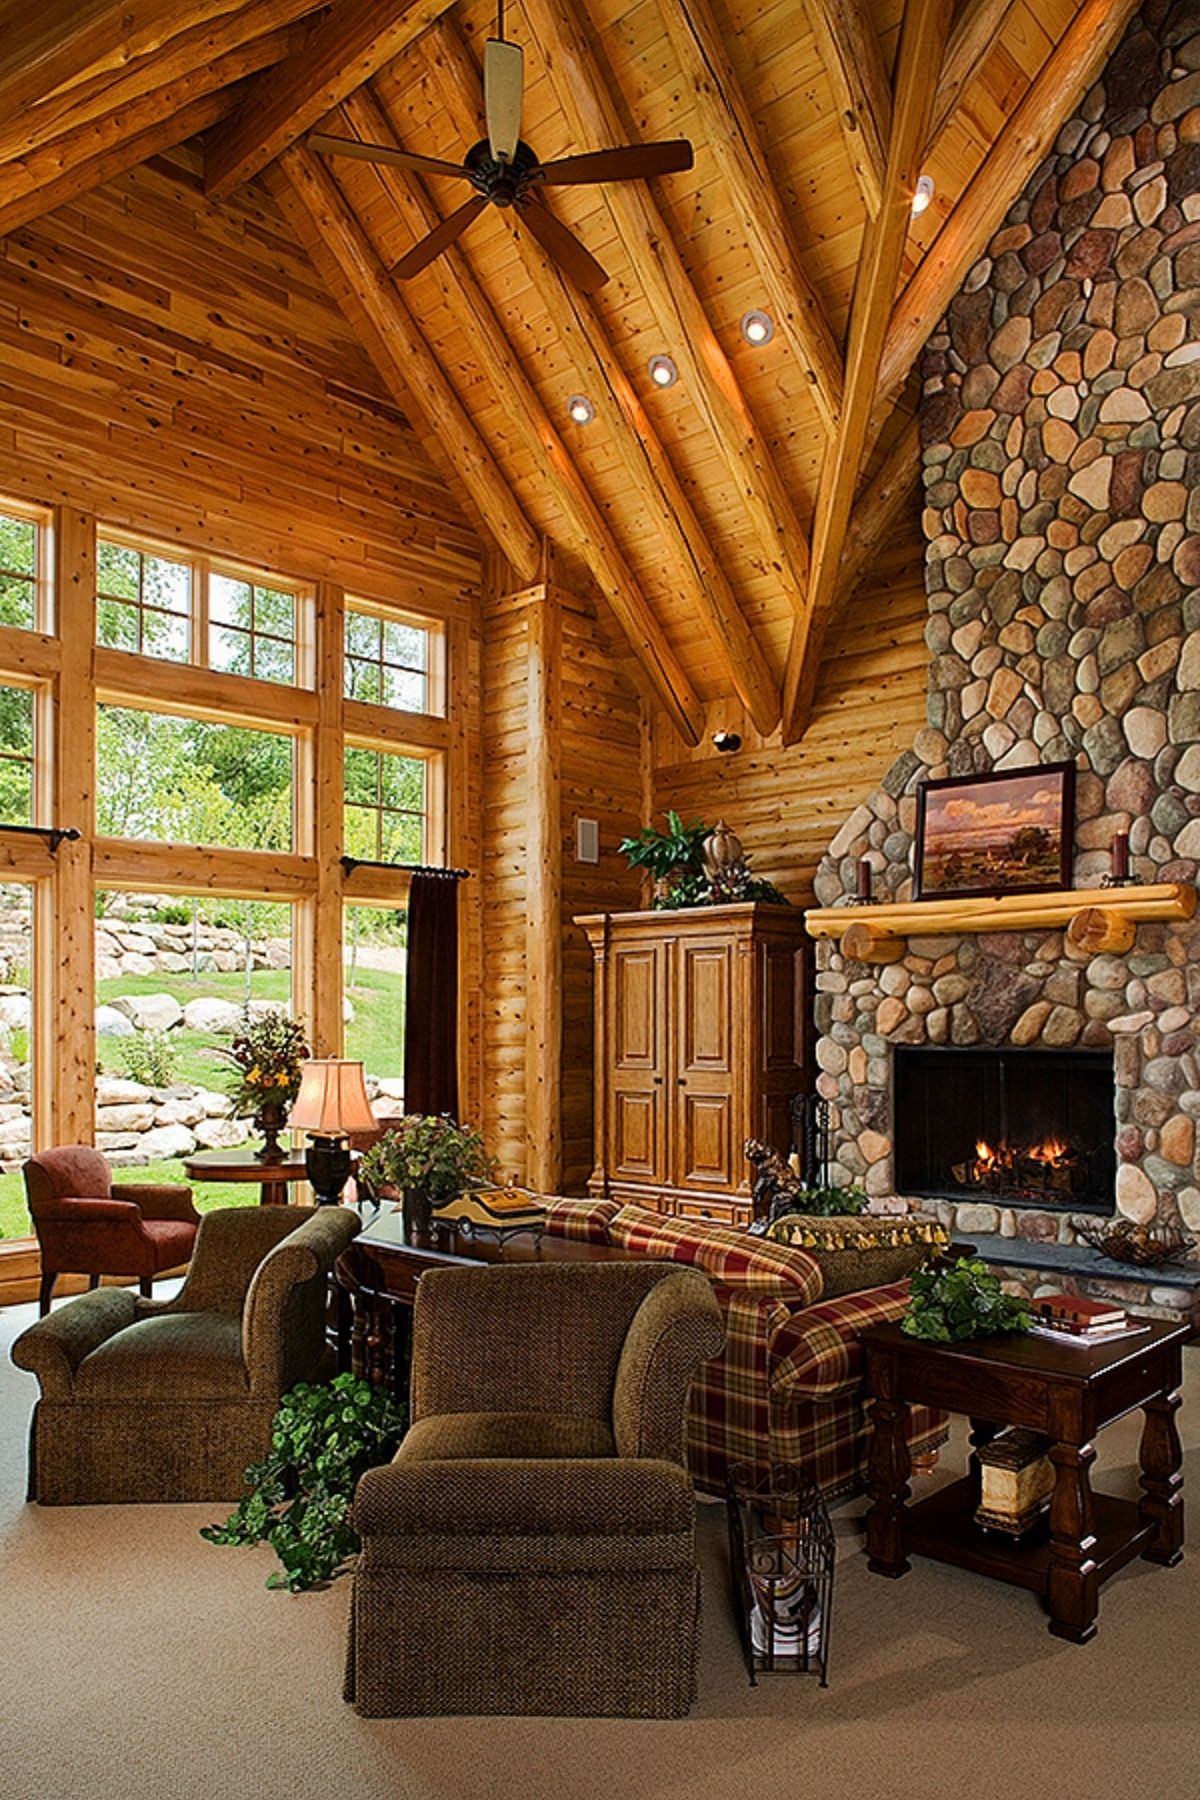 great room with stone fireplace in right backgound windows on left and dark brown chairs in center